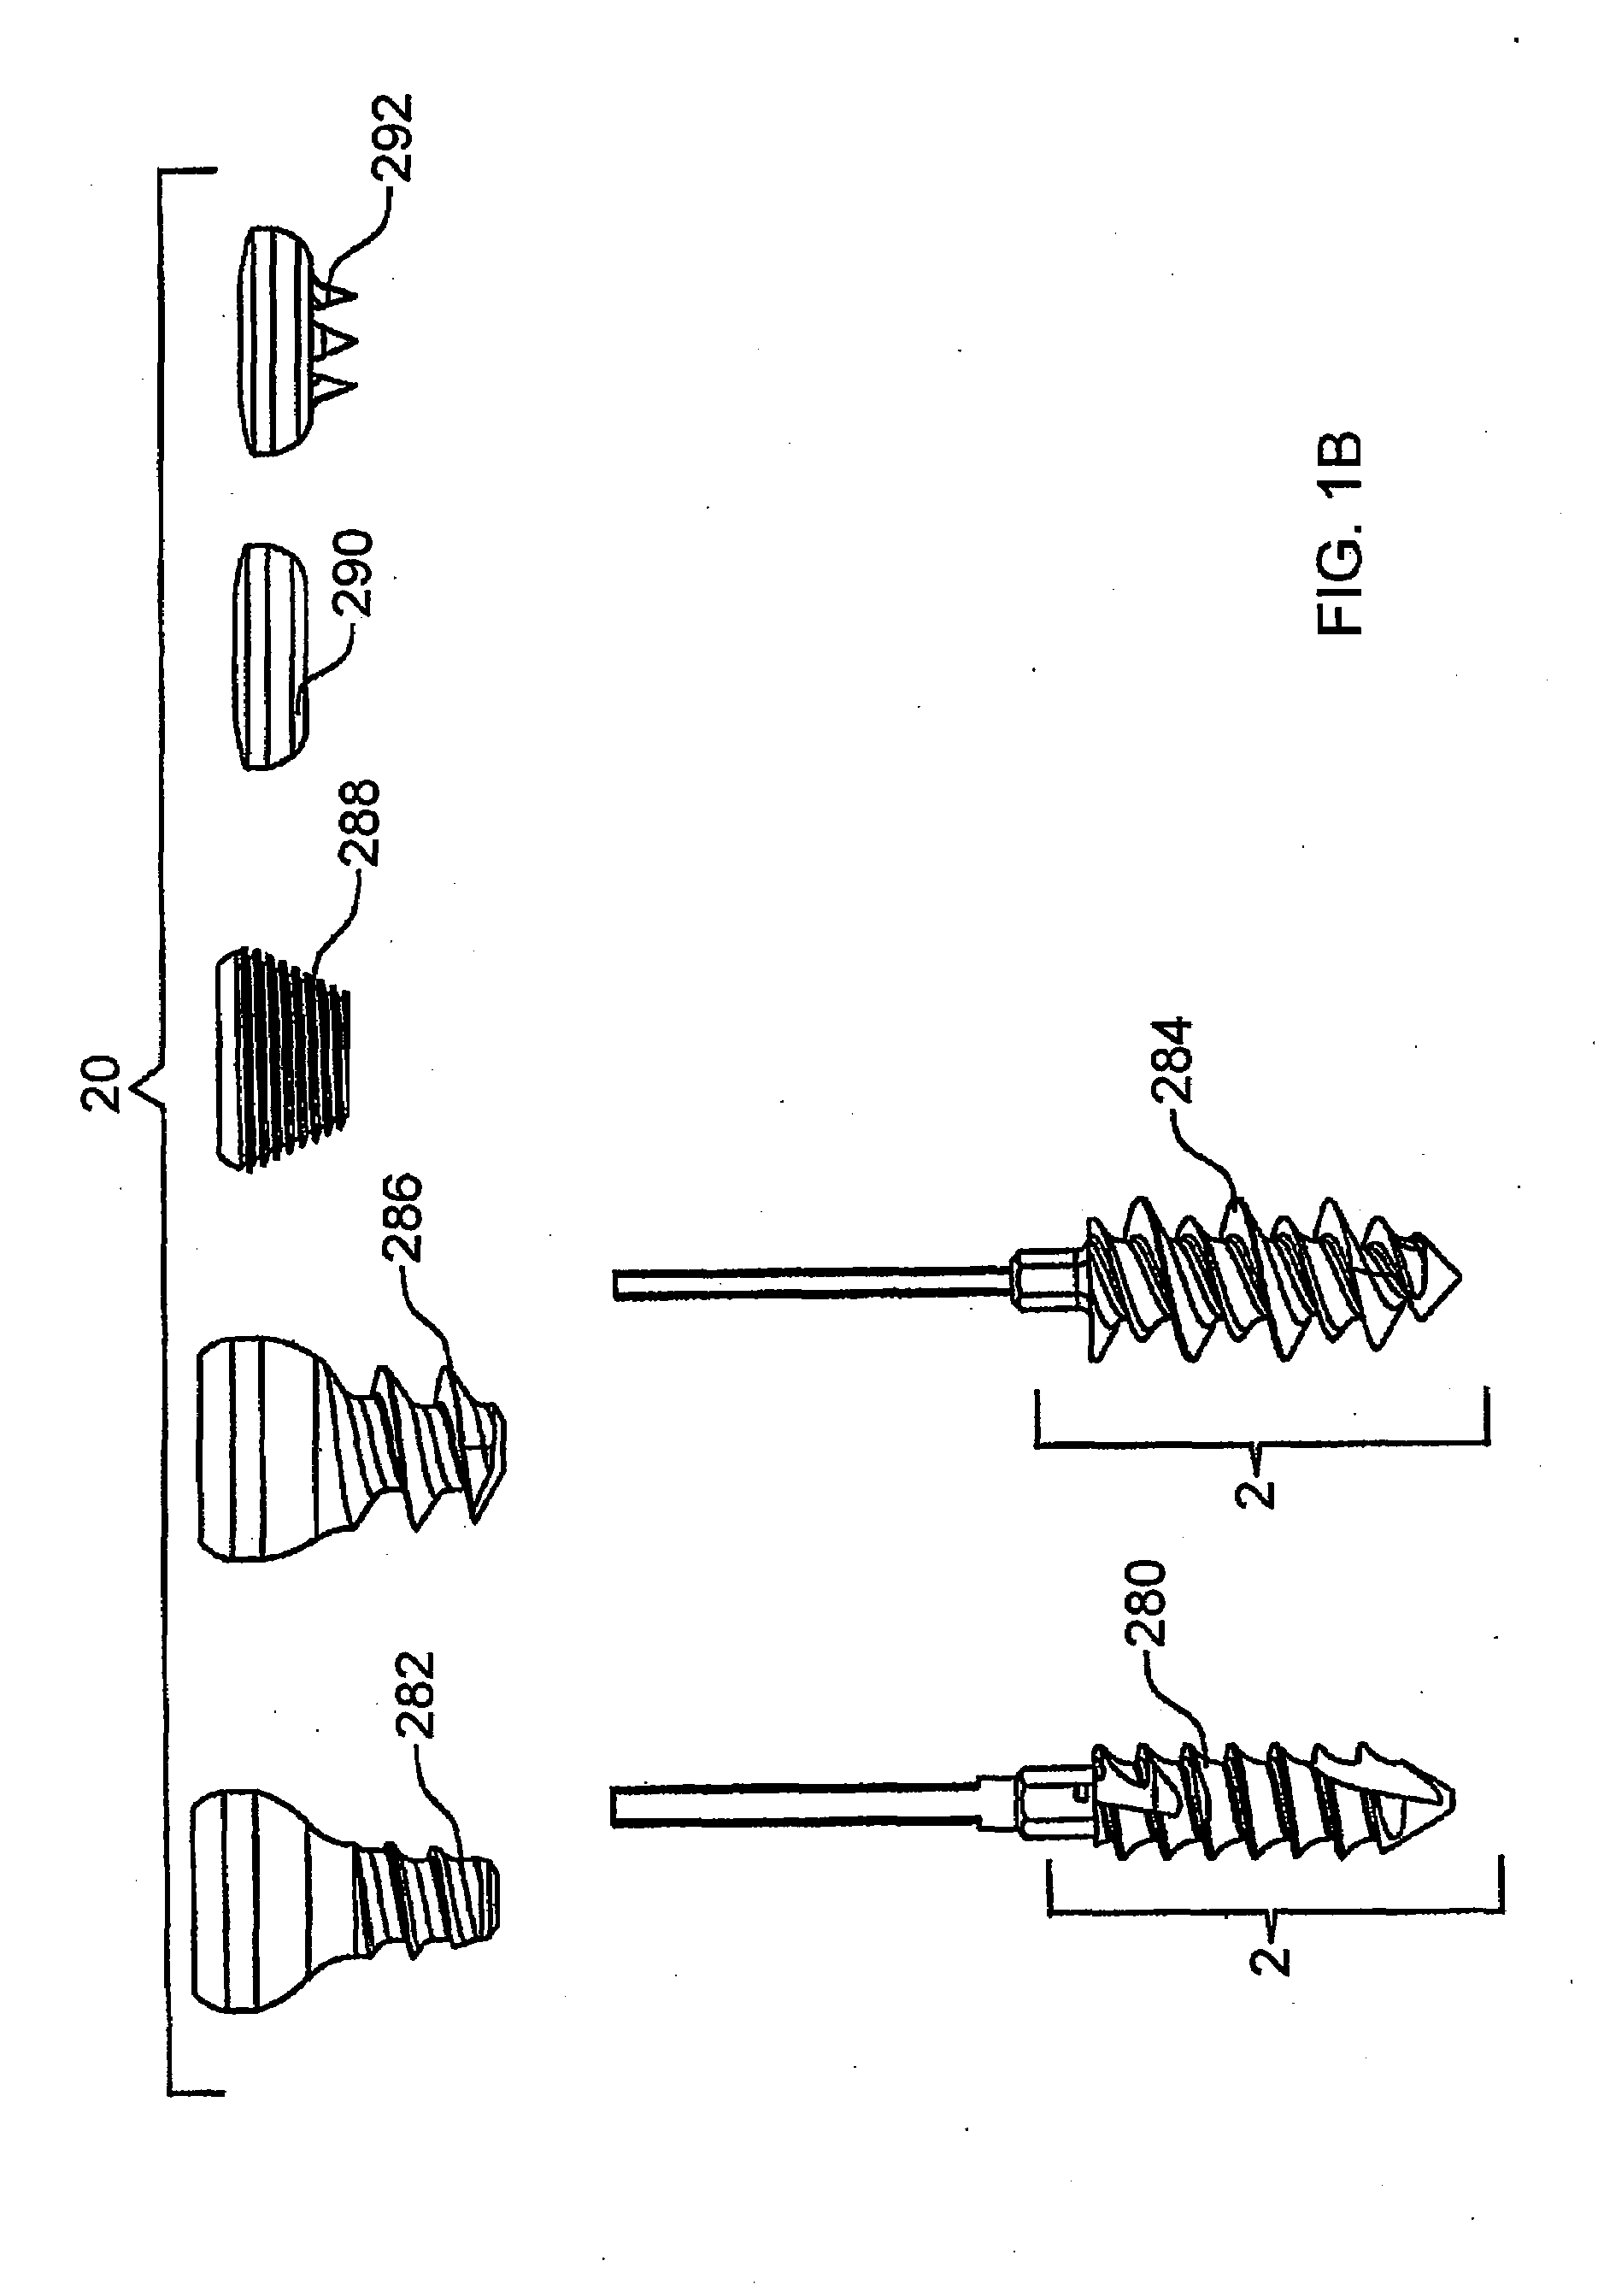 Stabilization system and method for the fixation of bone fractures